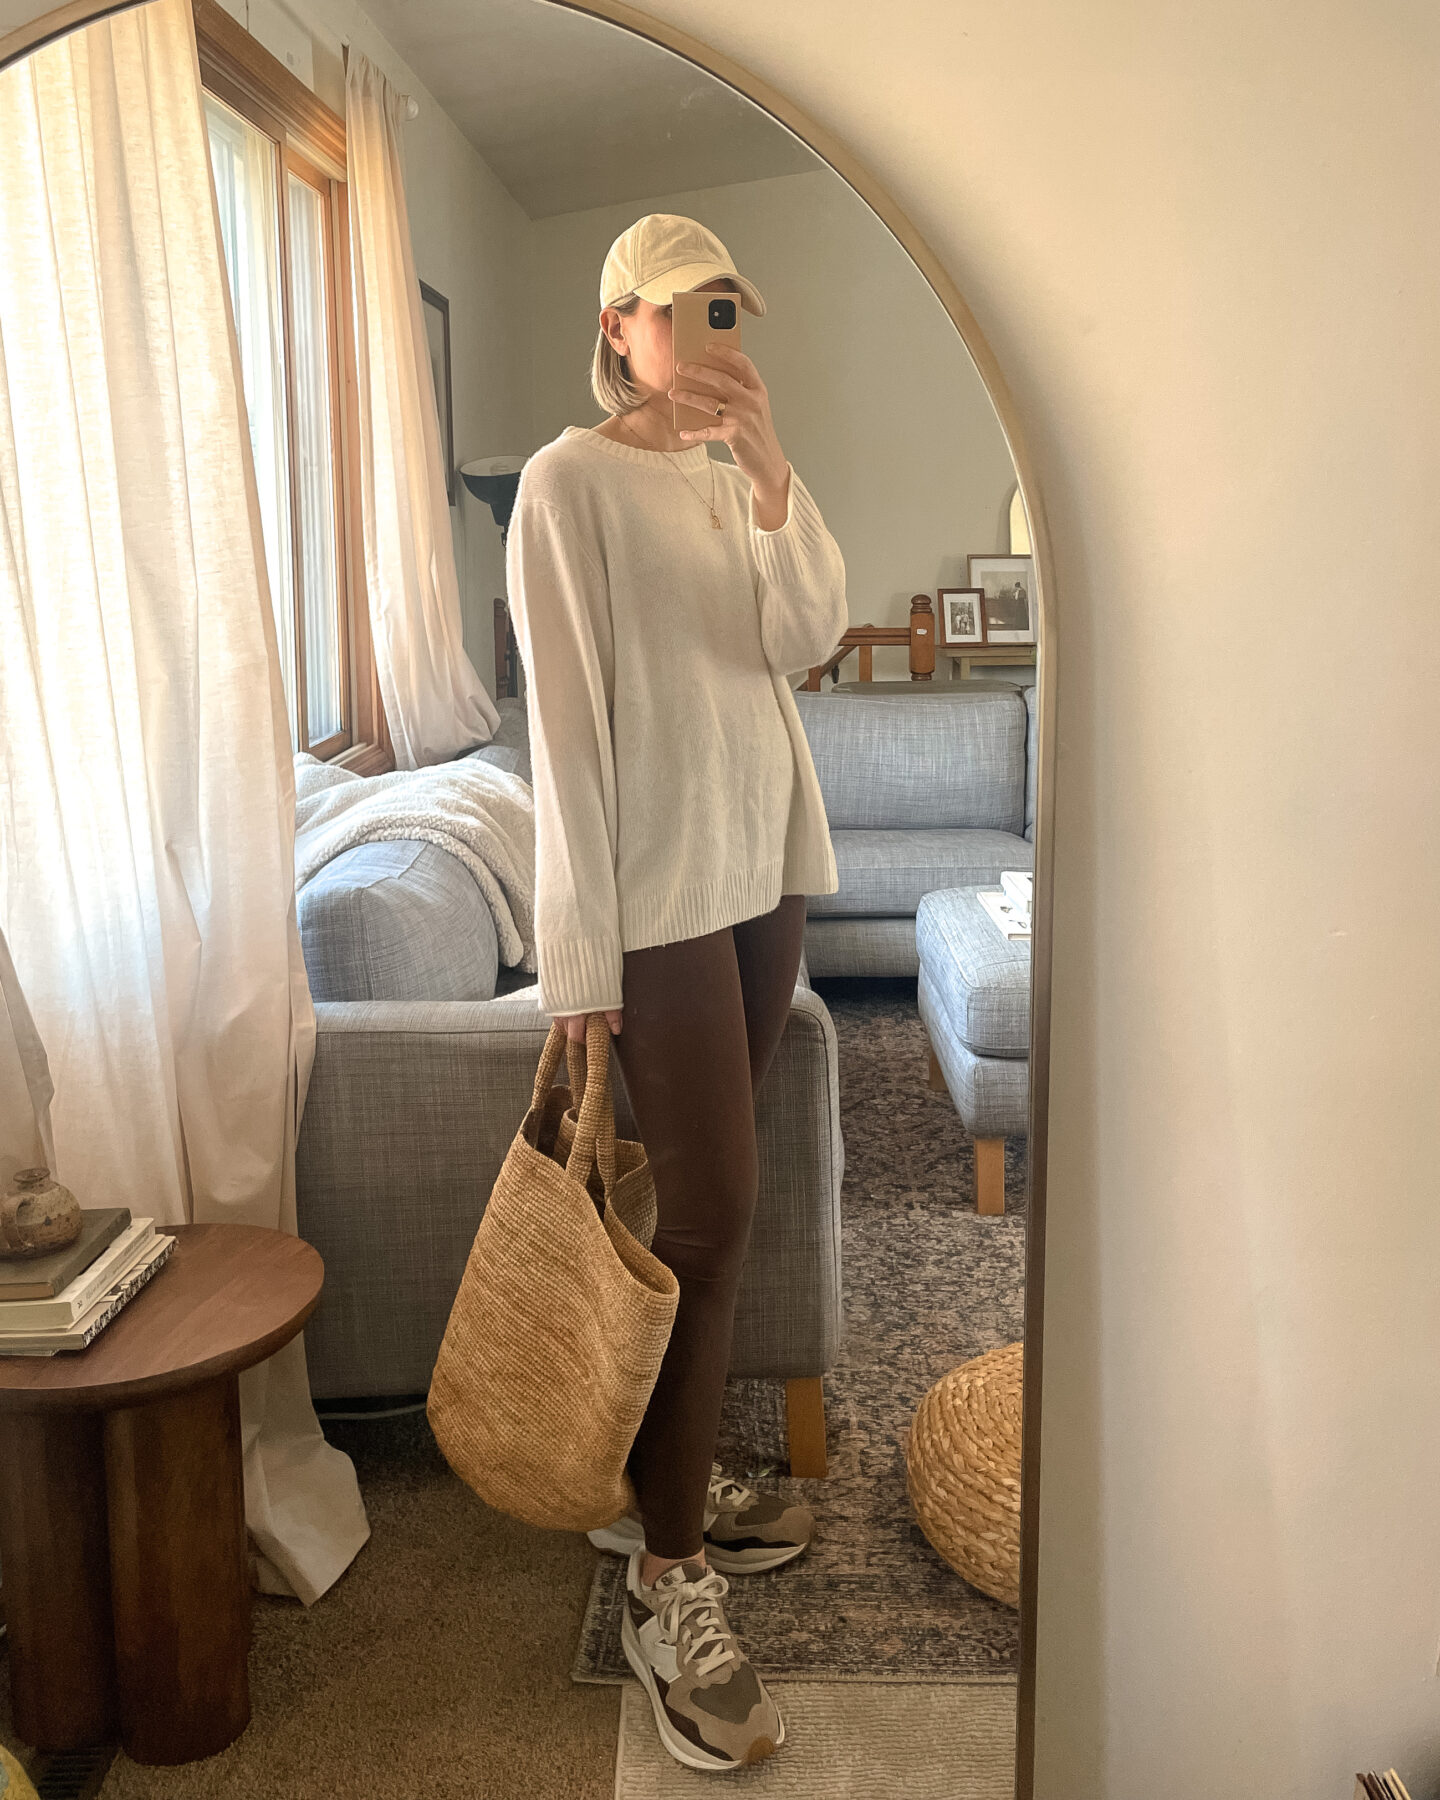 Karin Emily shares a mirror selfie wearing an oversized cashmere sweater, brown lululemon leggings, brown new balance sneakers and a straw tote